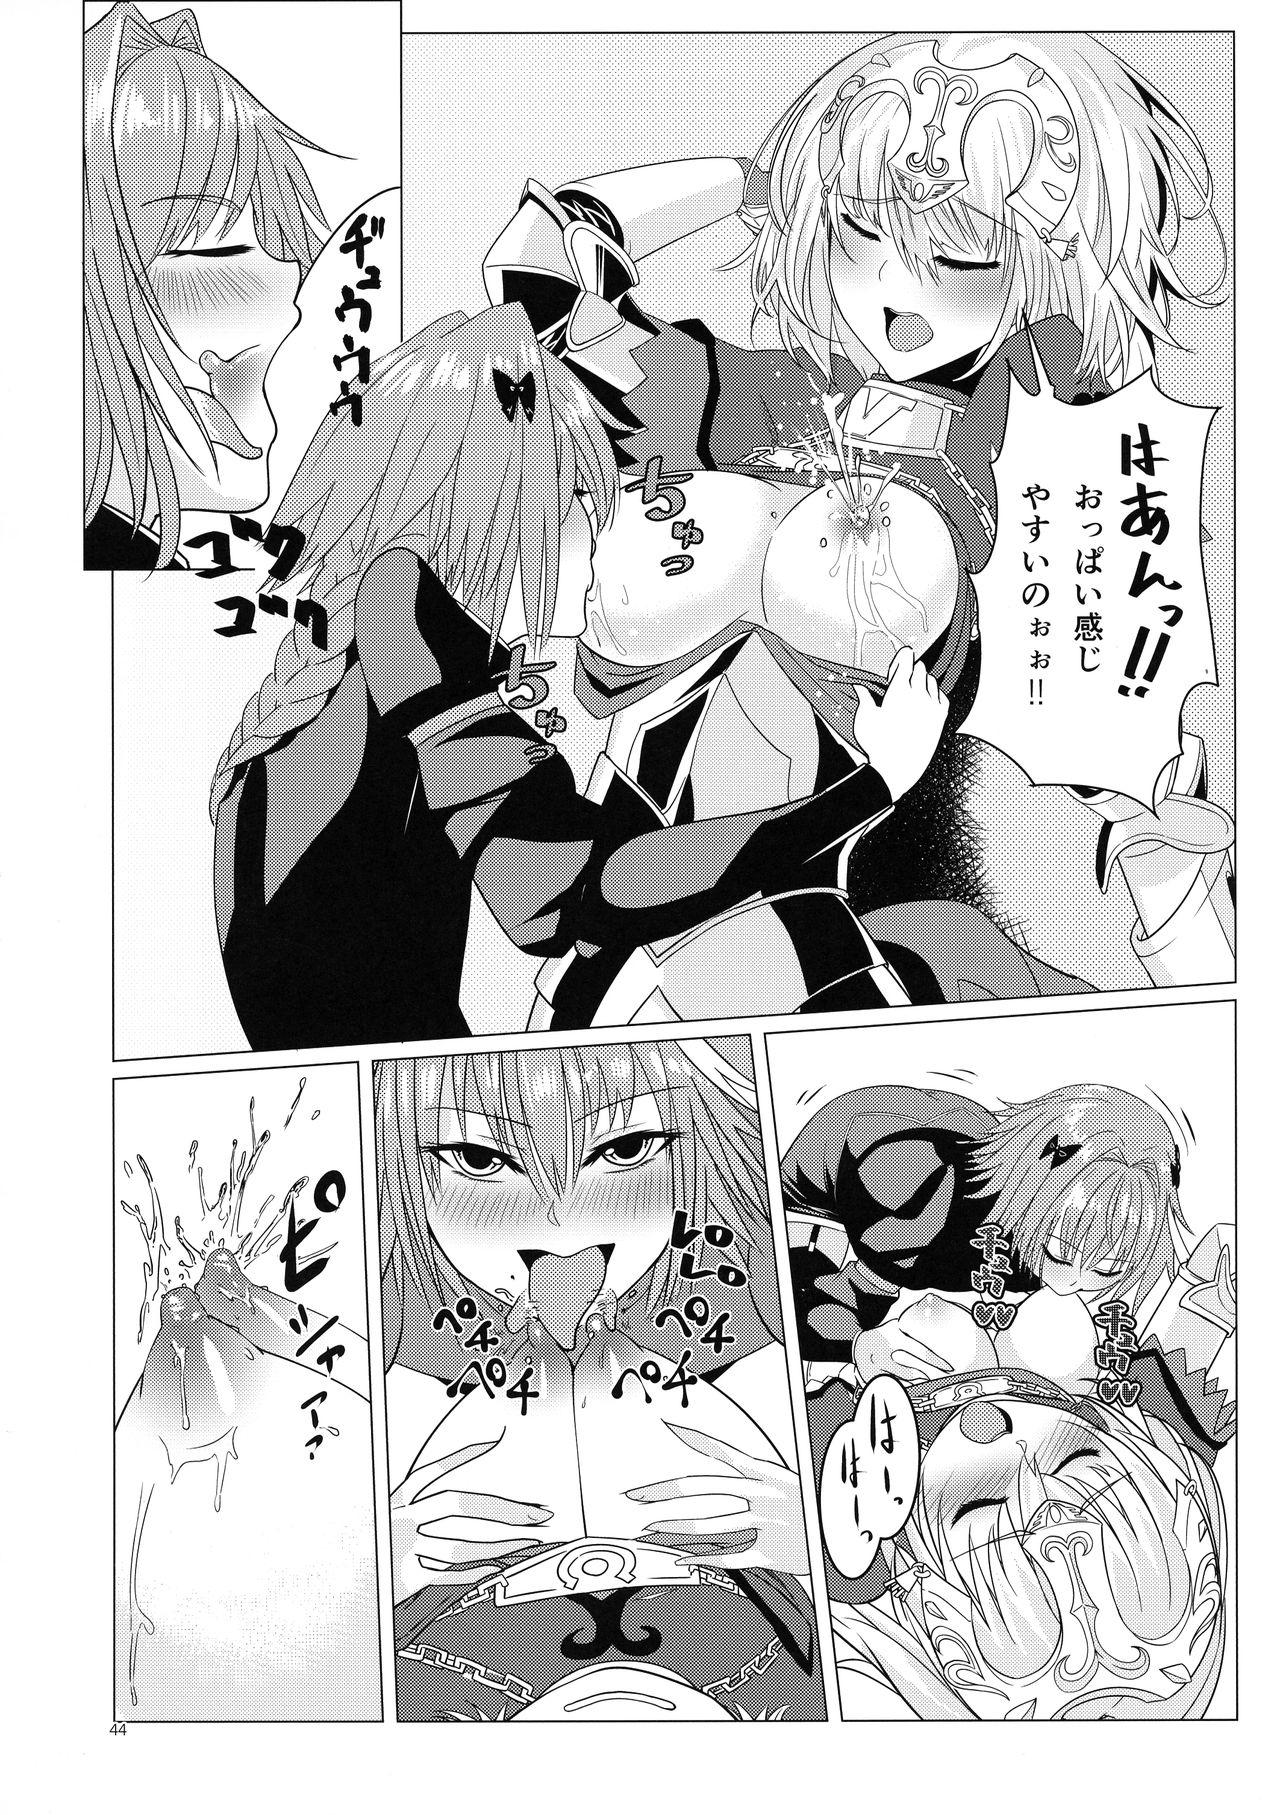 Matching Spirits - Jeanne and Astolfo have sex 40